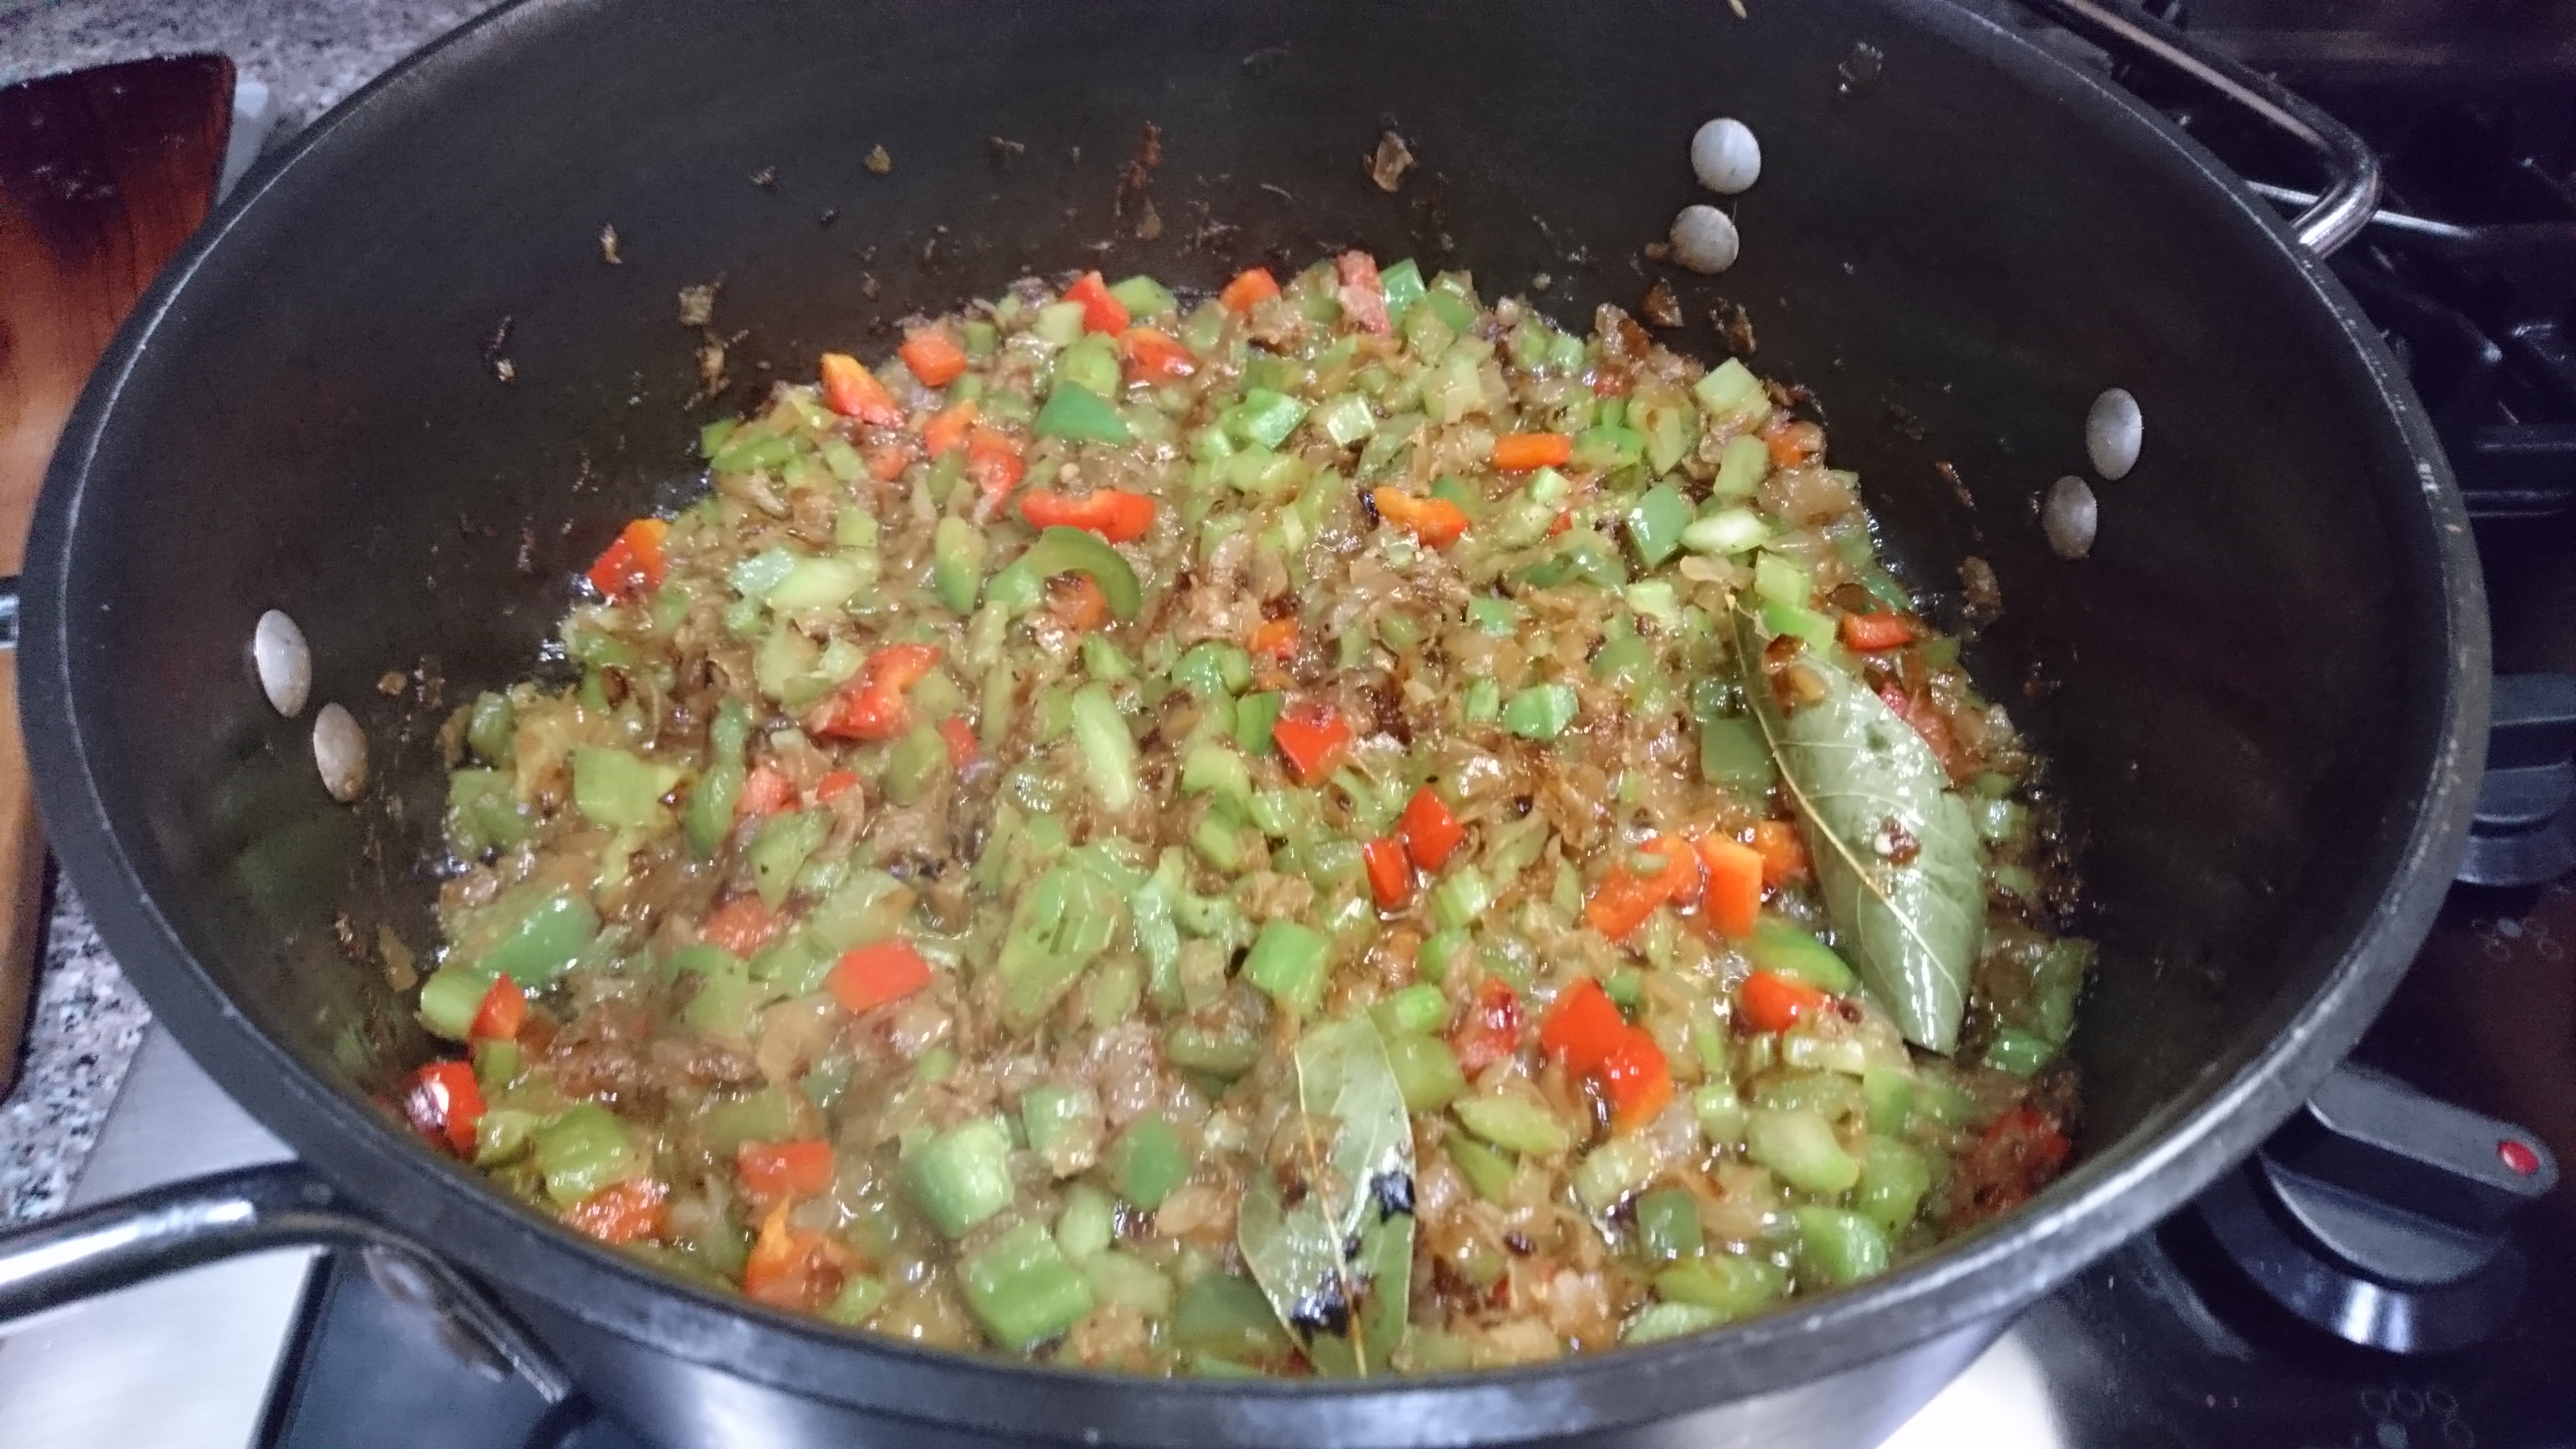 onions, peppers, and celery cooking in a large pot